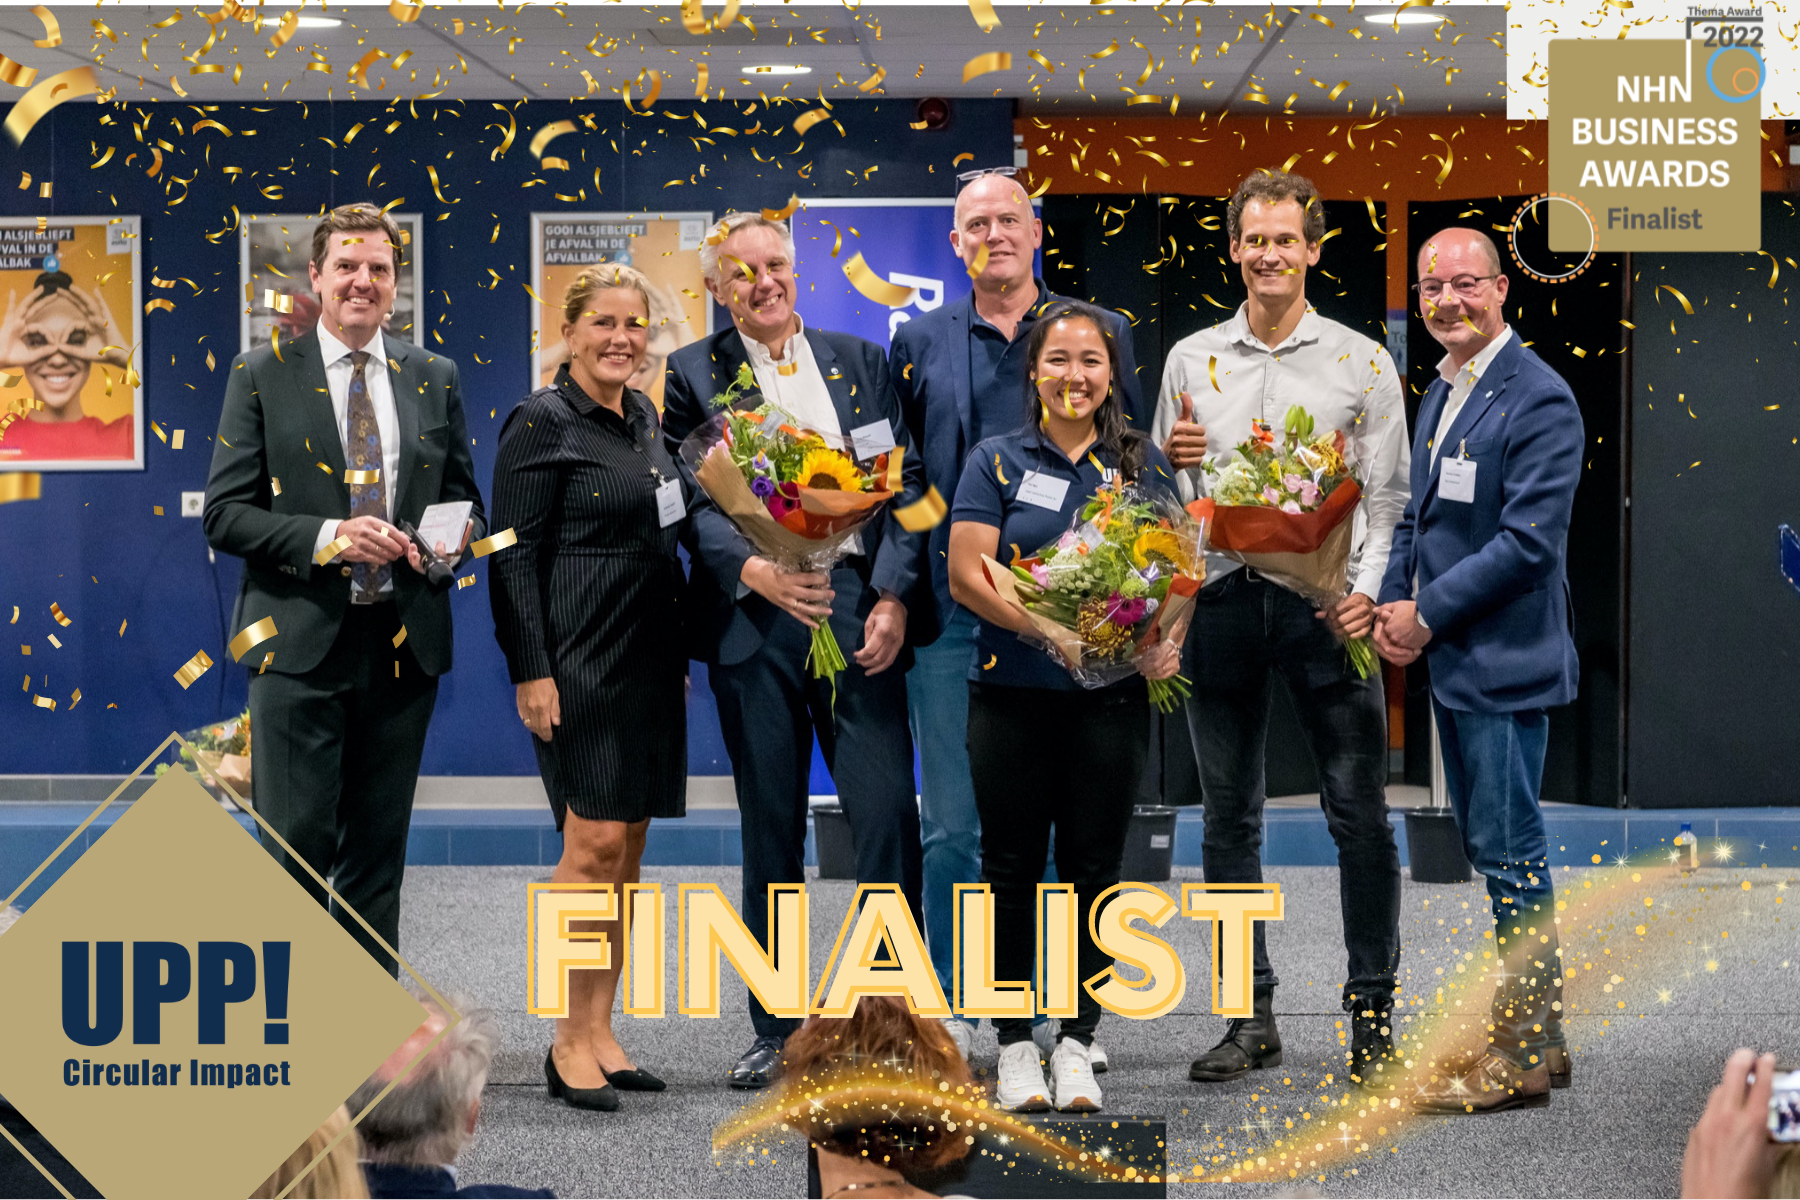 UPP! GOES TO THE FINAL OF THE NHN BUSINESS AWARDS 2022